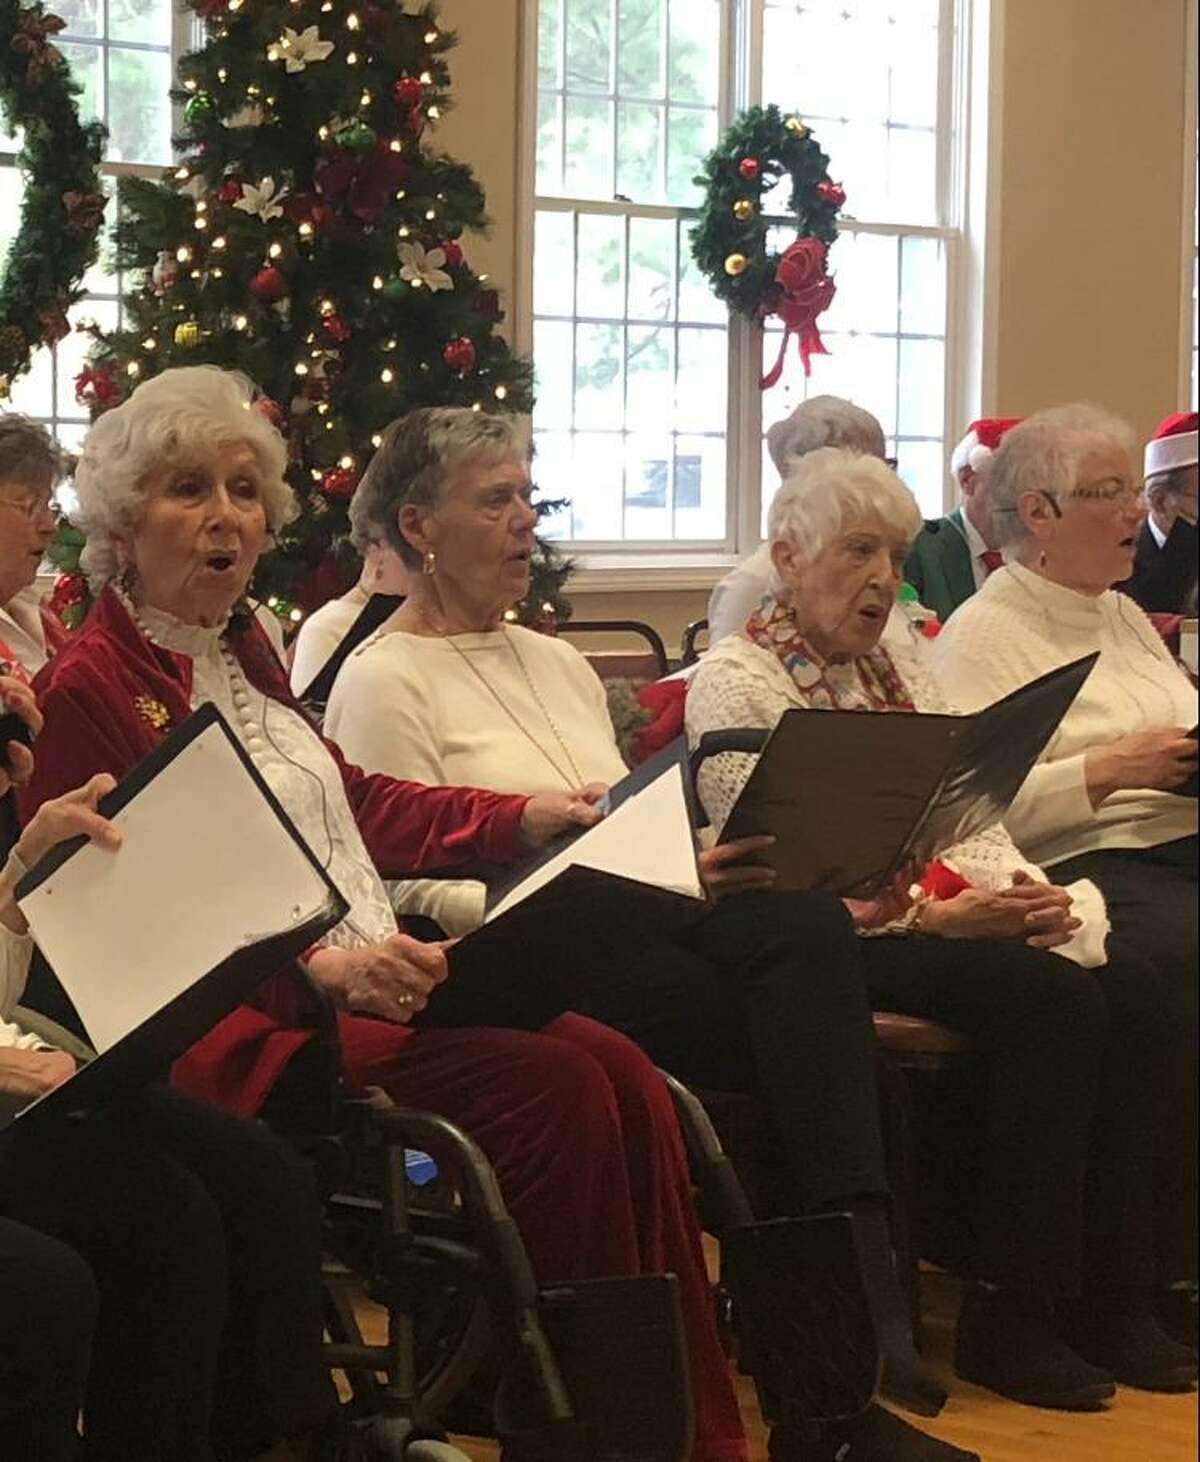 Christmas was in the air at the city’s senior center Friday as the Shelton Songsters regaled a packed house with some holiday classics.